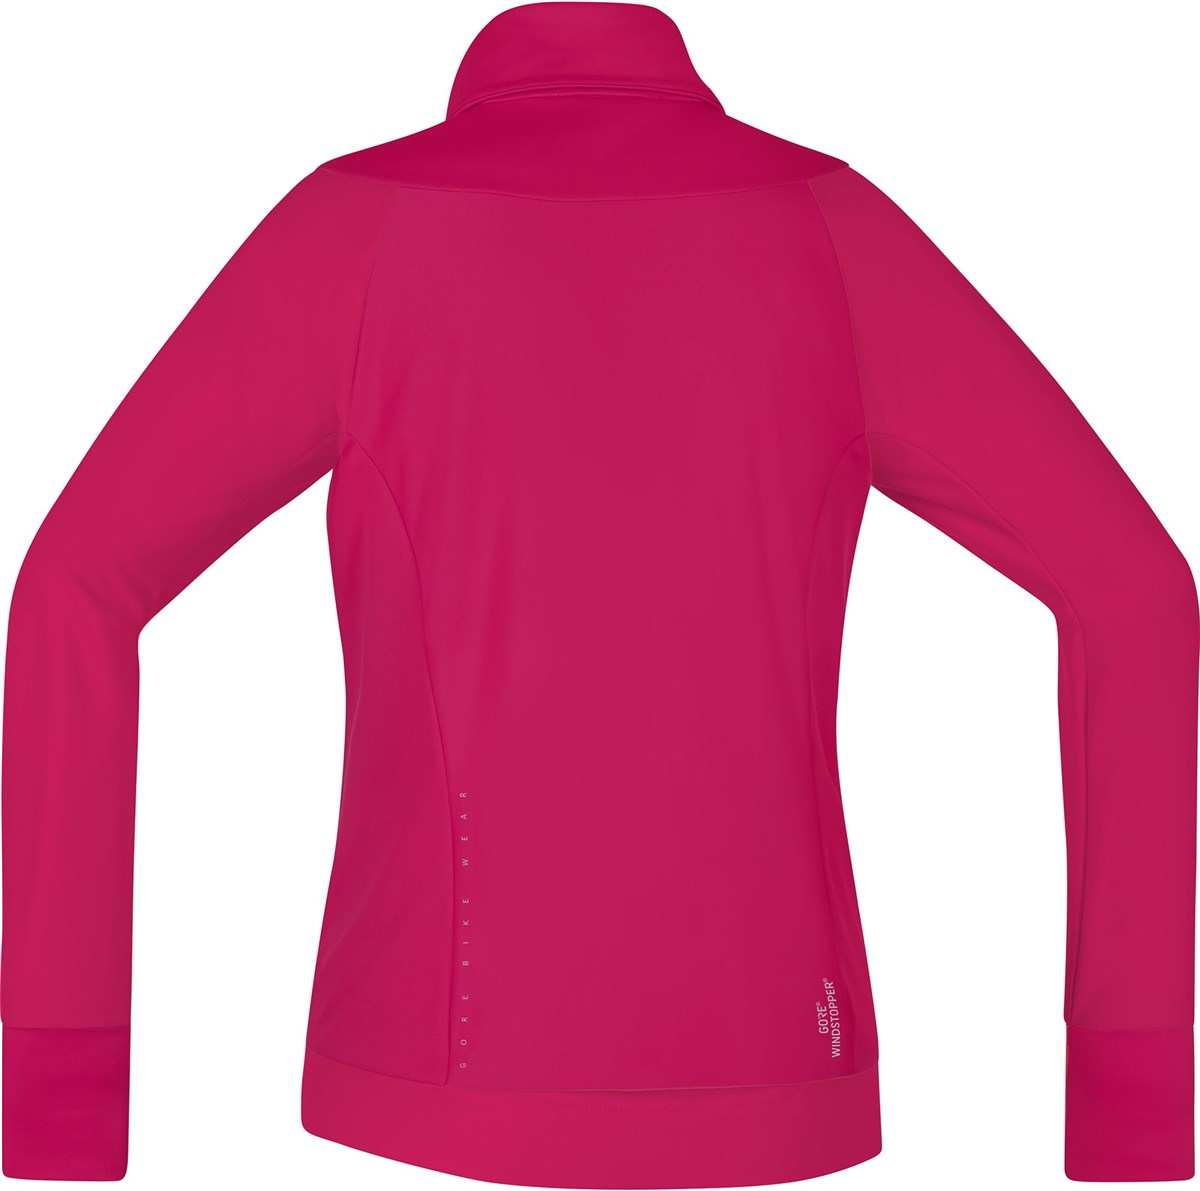 Gore Power Trail Womens Windstopper Soft Shell Jacket AW17